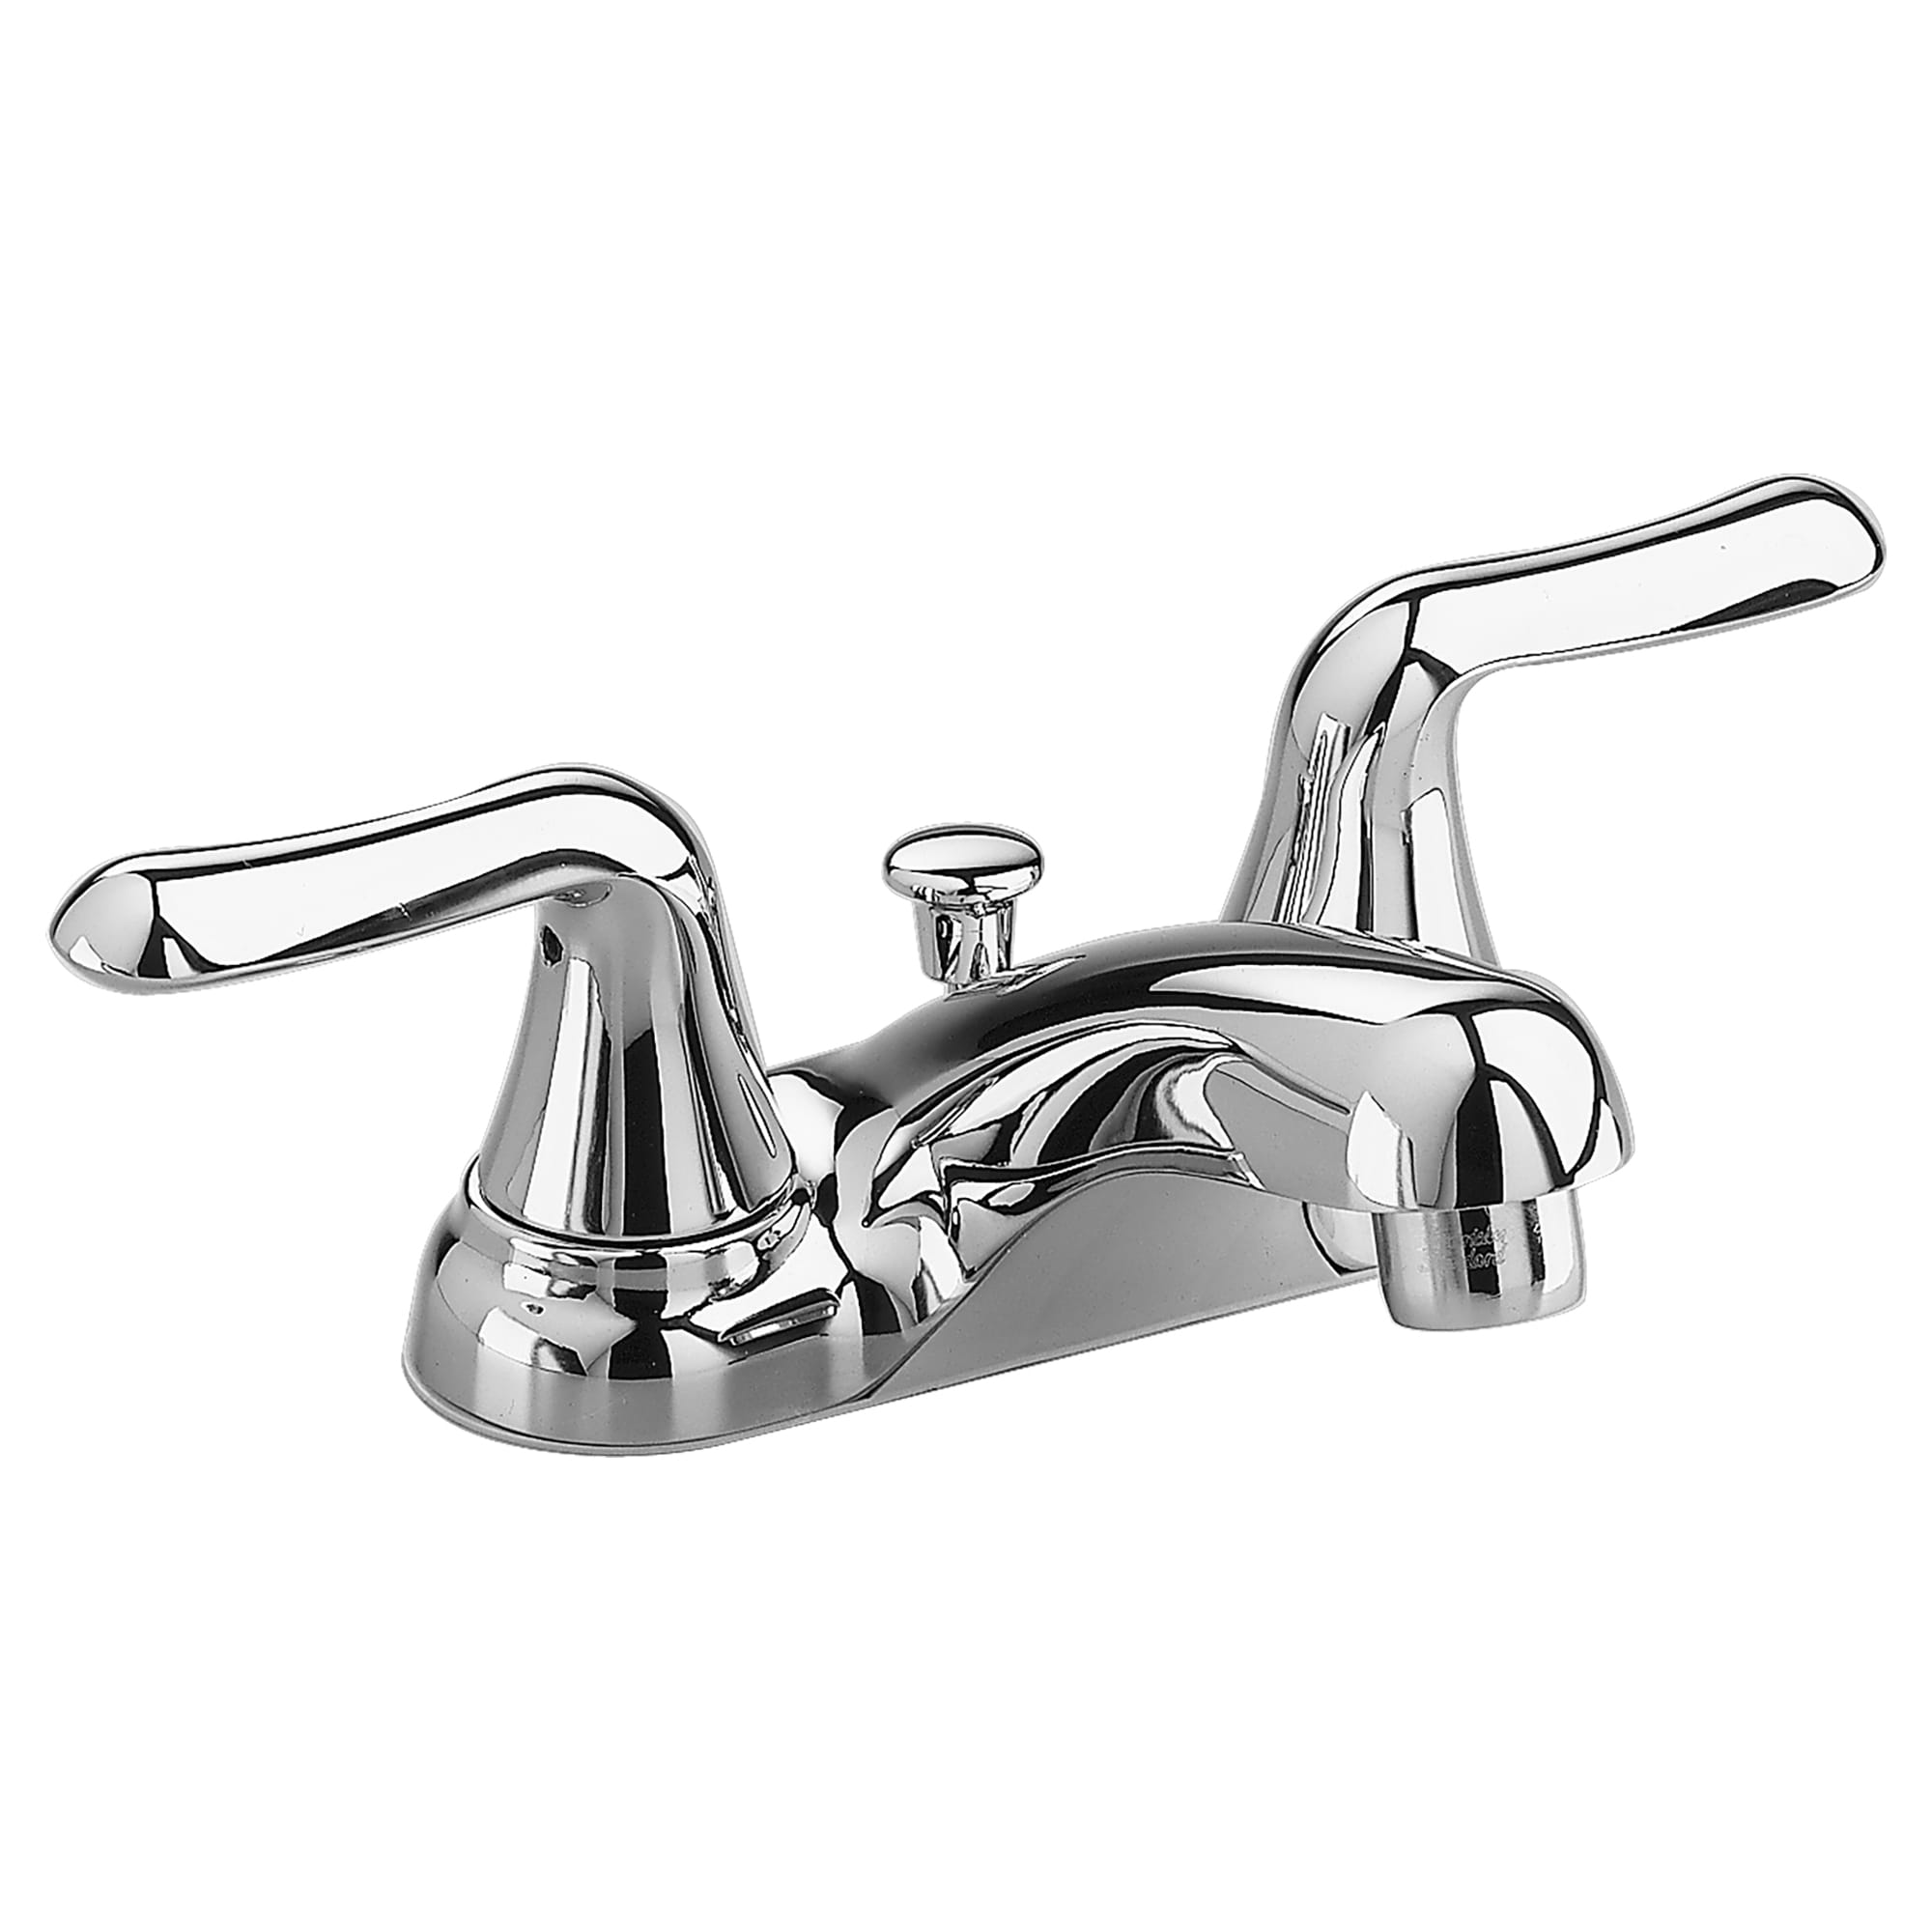 Colony Soft 4 Inch Centerset 2 Handle Bathroom Faucet 12 gpm 45 L min With Lever Handles CHROME